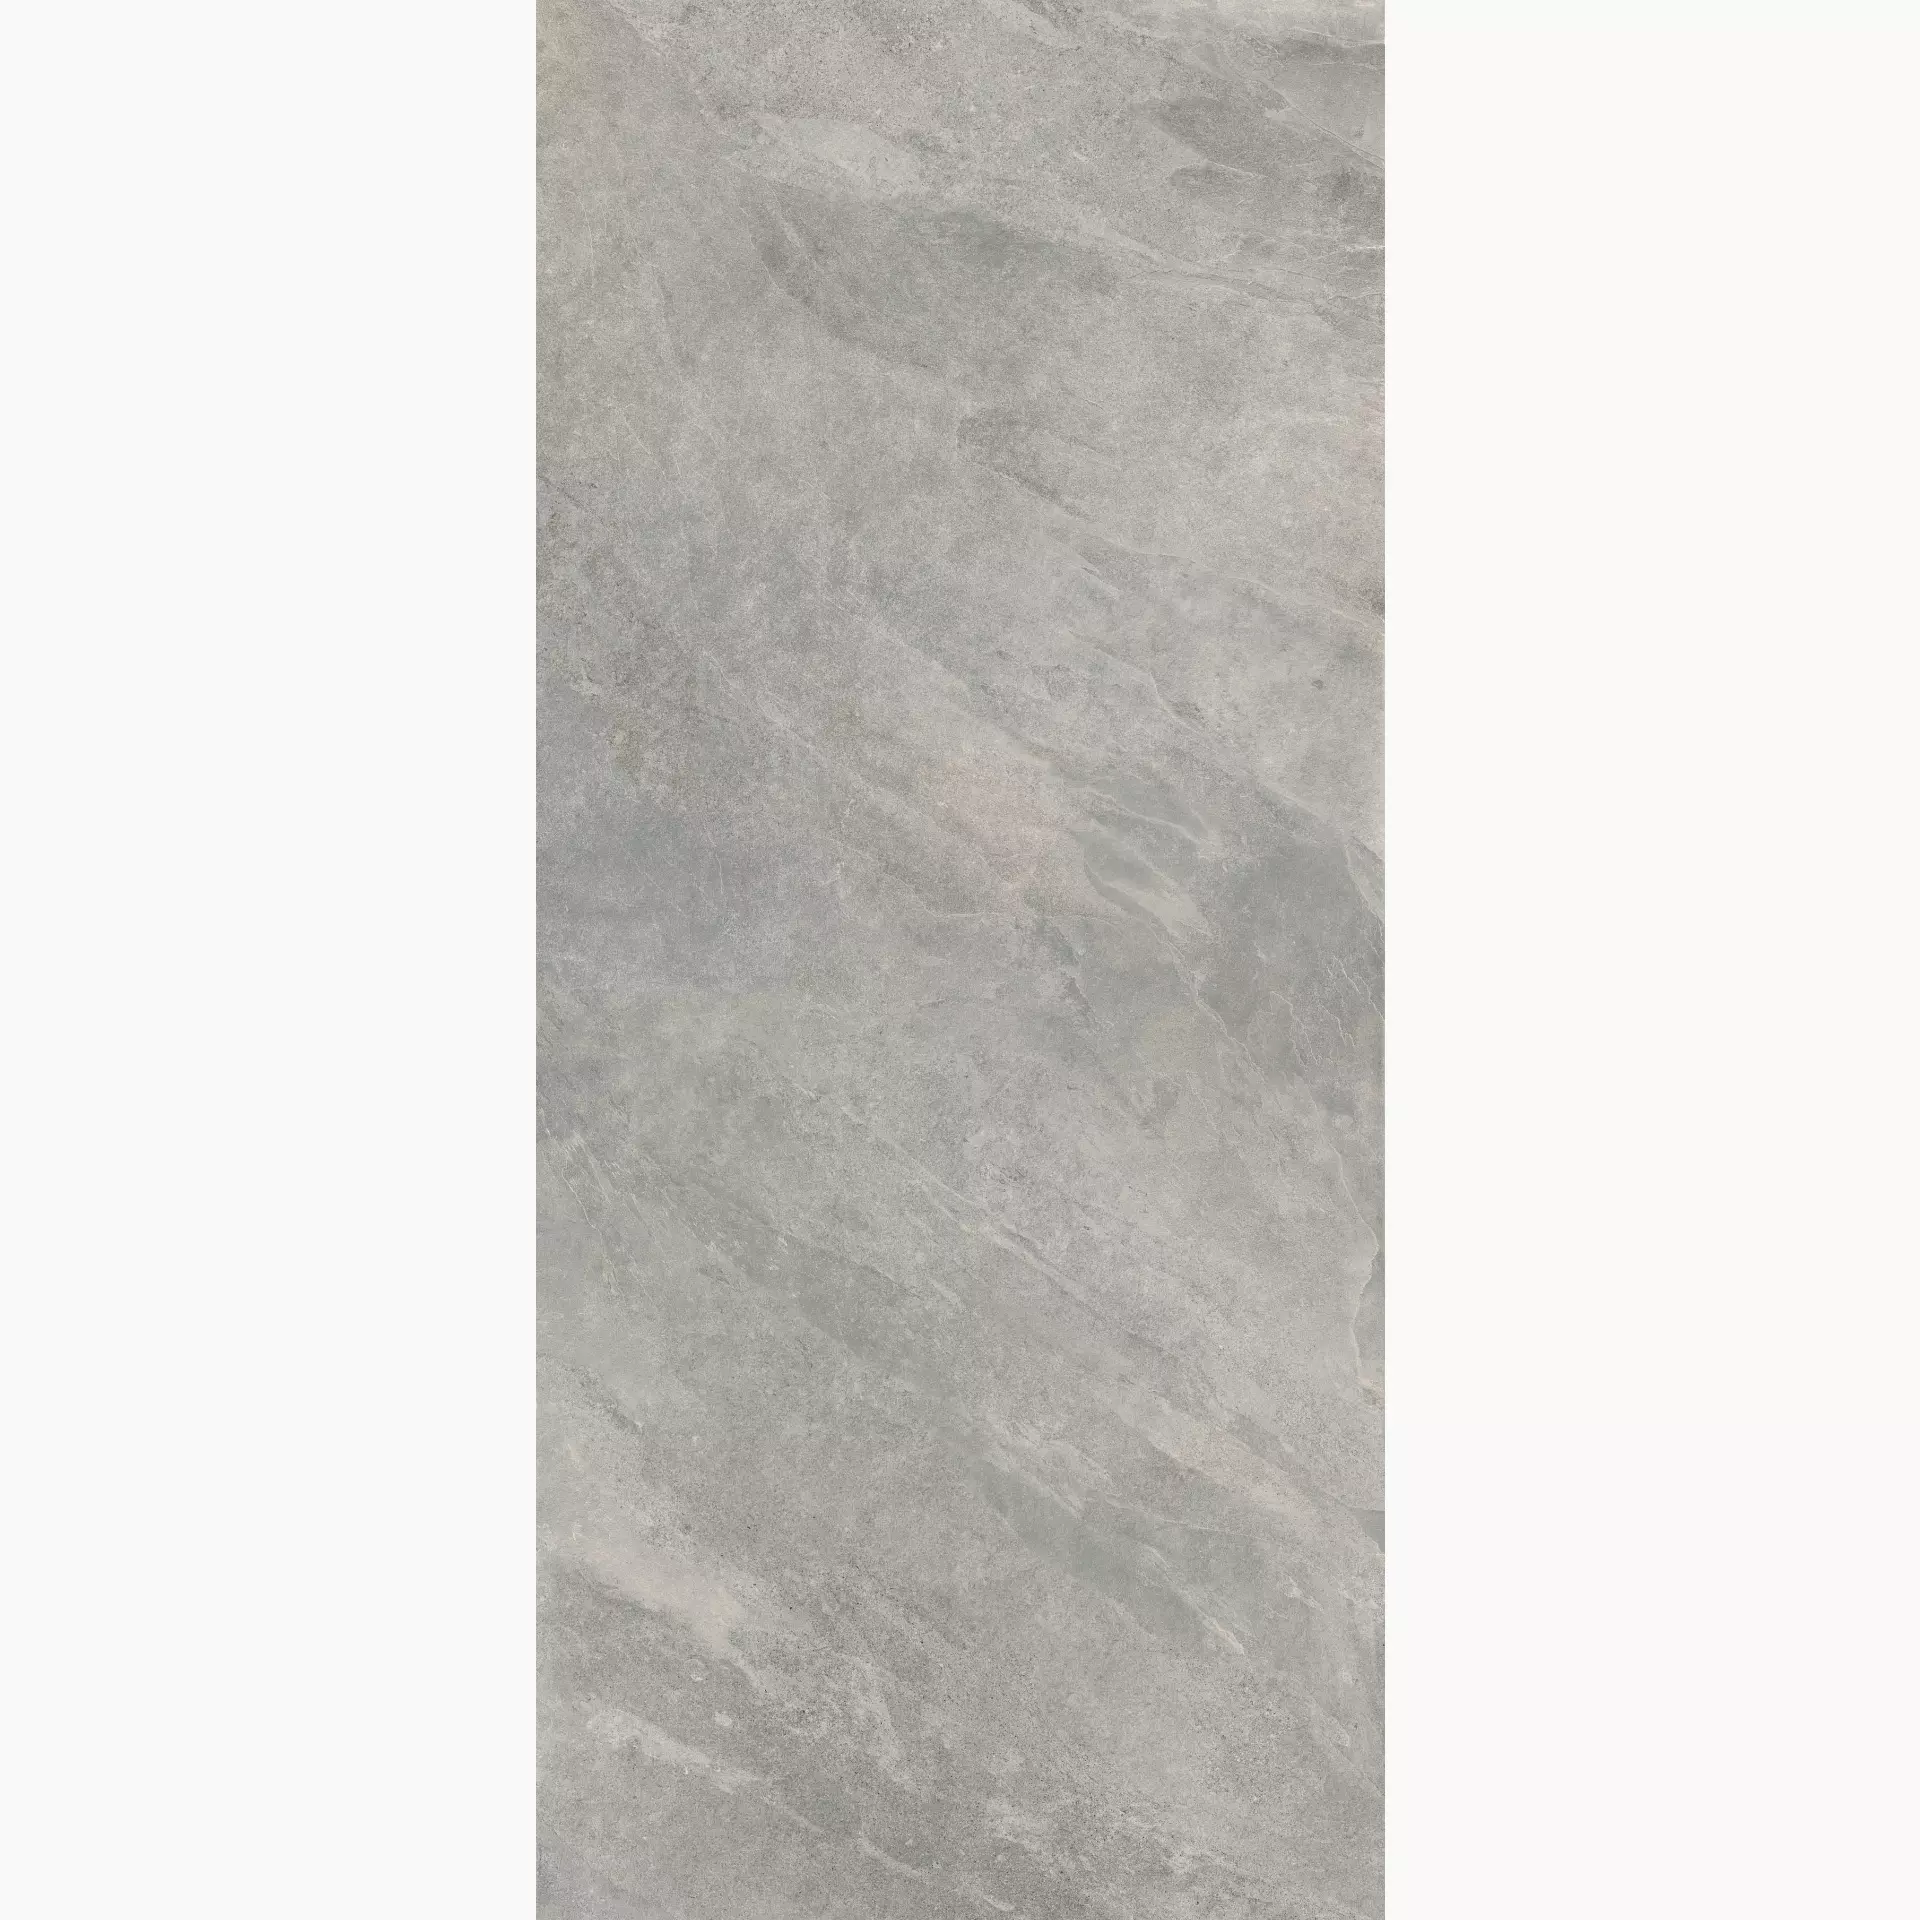 ABK Monolith Greige Naturale PF60008799 120x280cm rectified 6mm